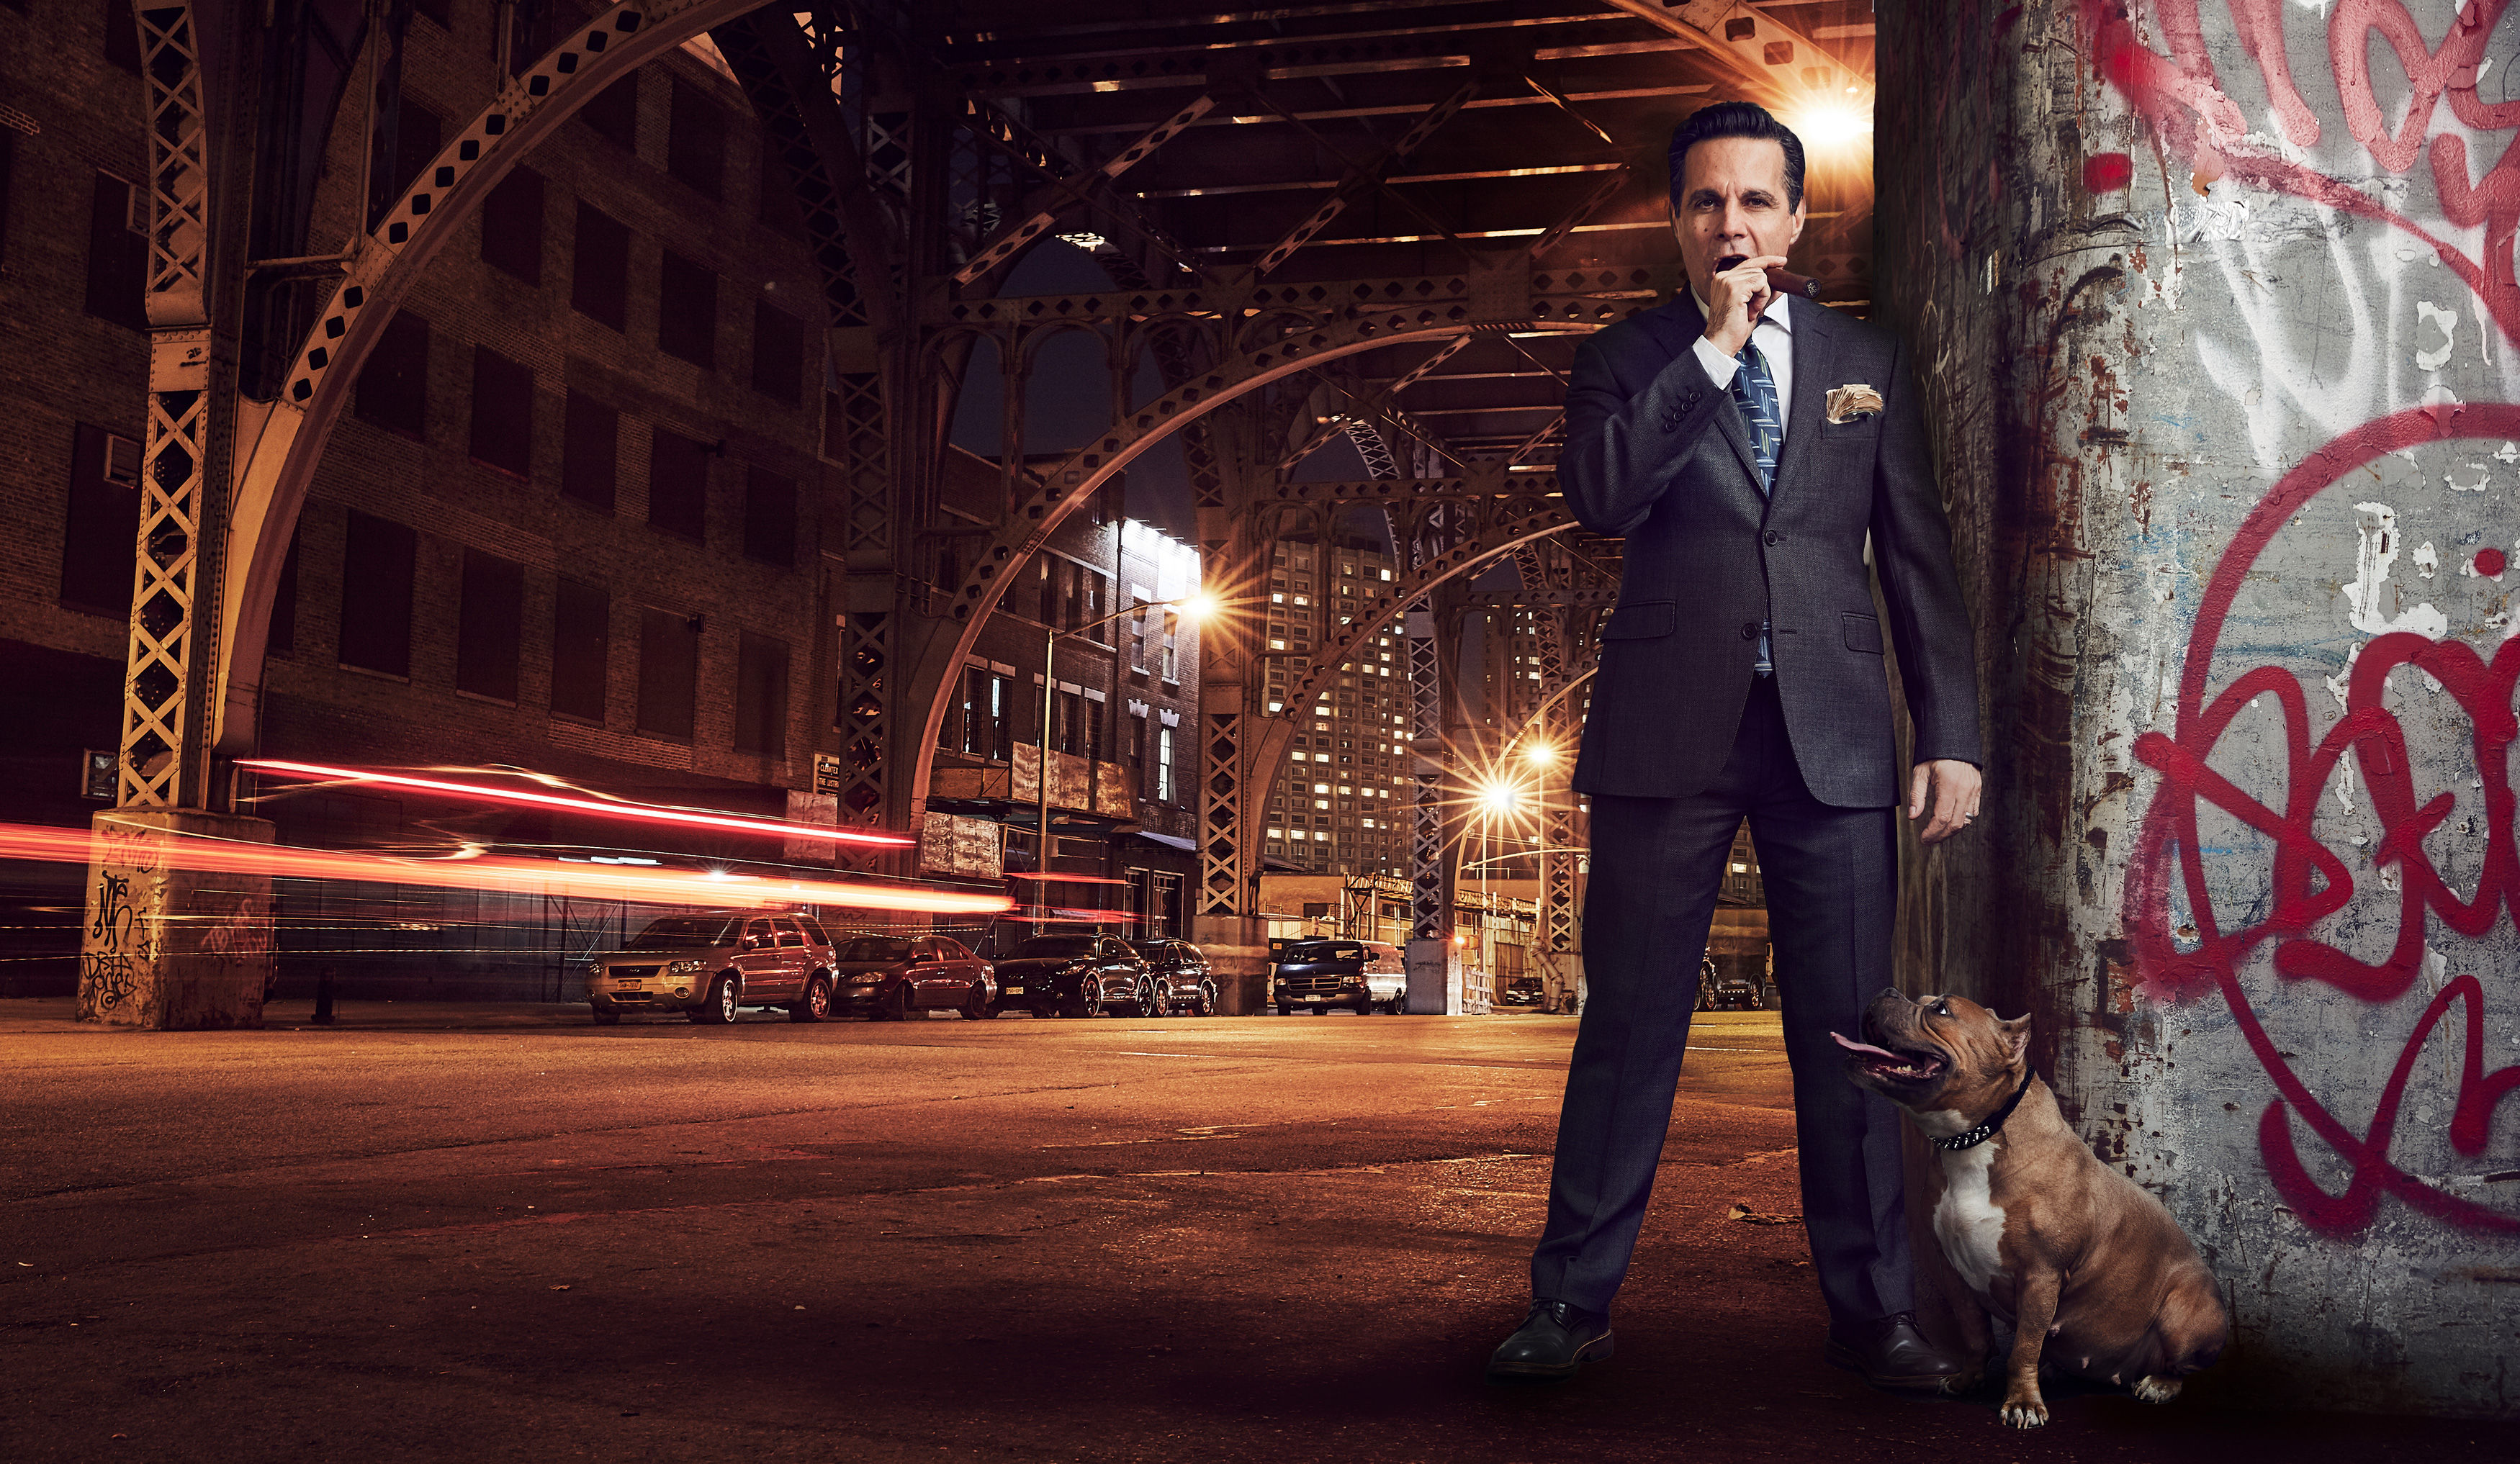 Actor Mario Cantone photographed with a rescue dog for Louie’s Legacy's 2018 Annual Fundraising Calendar "Paws of Gotham” to raise funds for animal rescue.